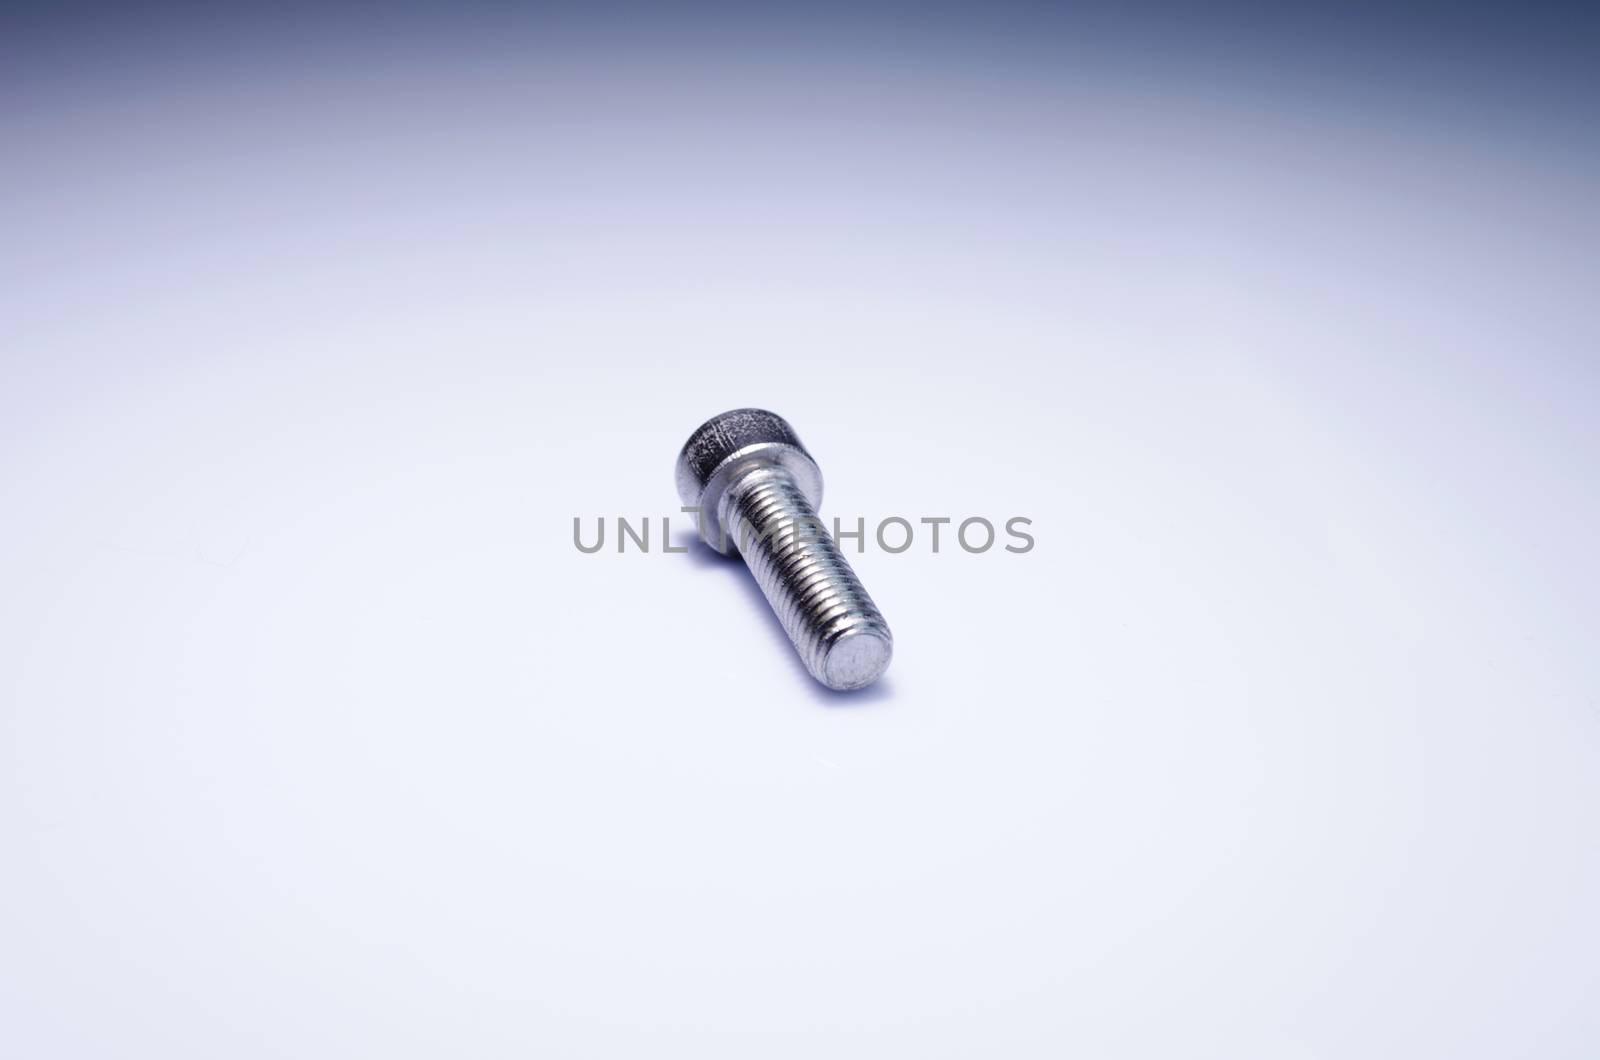 Special bolt used for solar projects and constructions